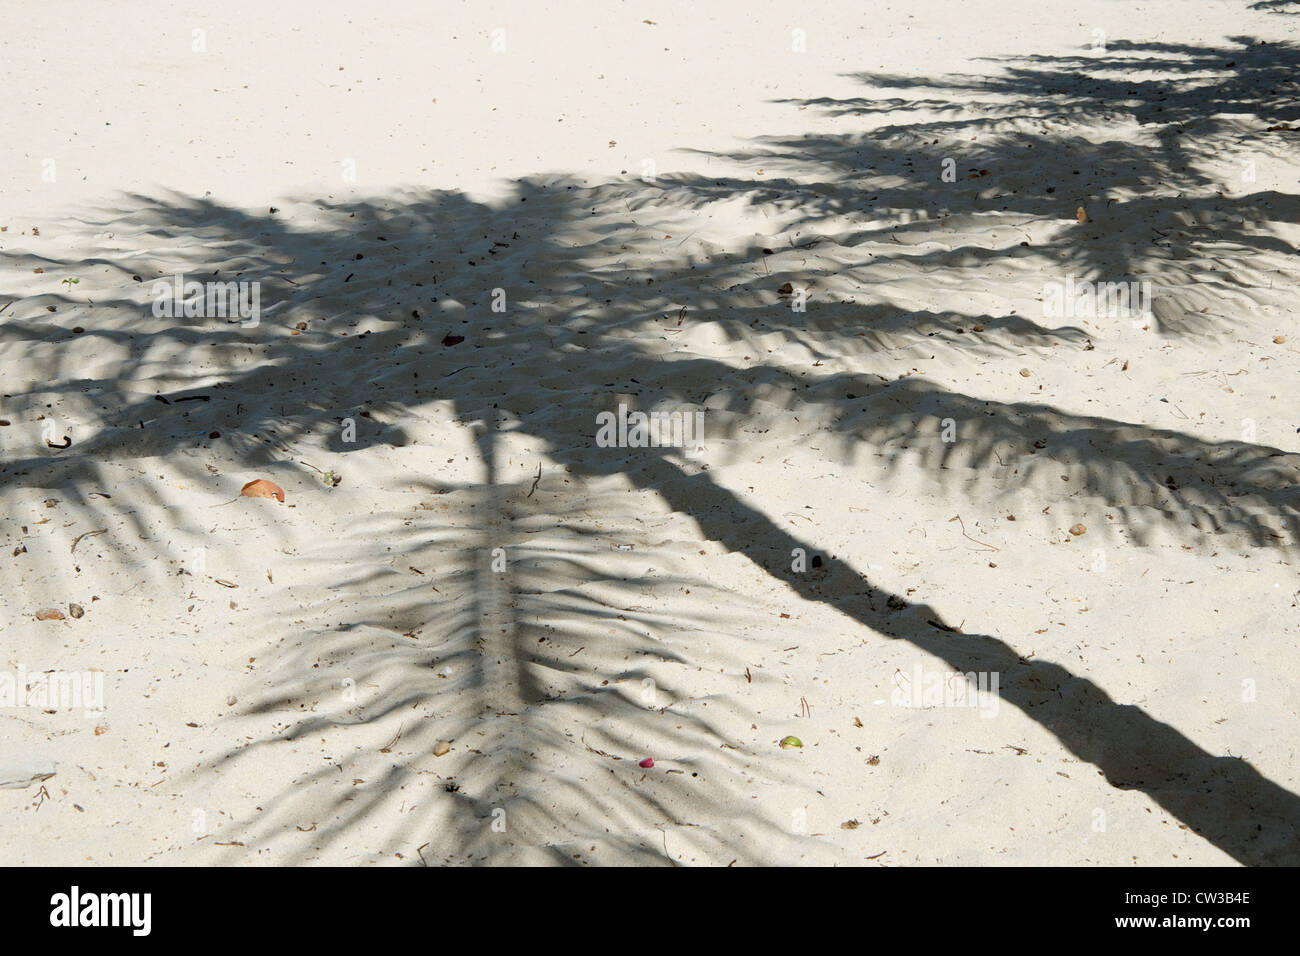 A coconut tree only produces a thin shadow. Poor sun protection. Palm tree on white sandy beach. Stock Photo